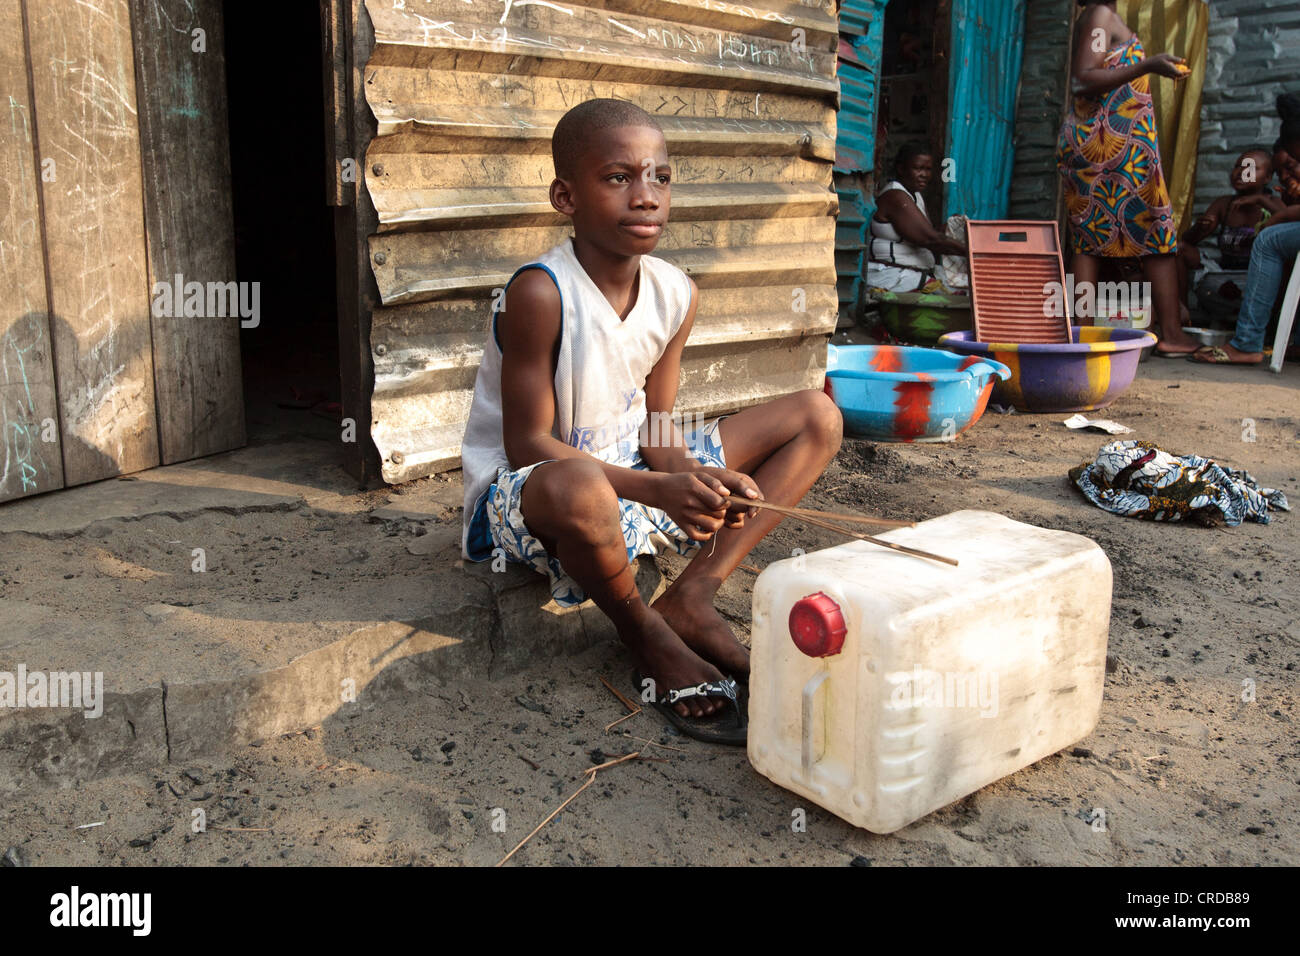 A boy plays drums on a plastic jerrican in the West Point slum in Monrovia, Montserrado county, Liberia on Monday April 2, 2012. Stock Photo